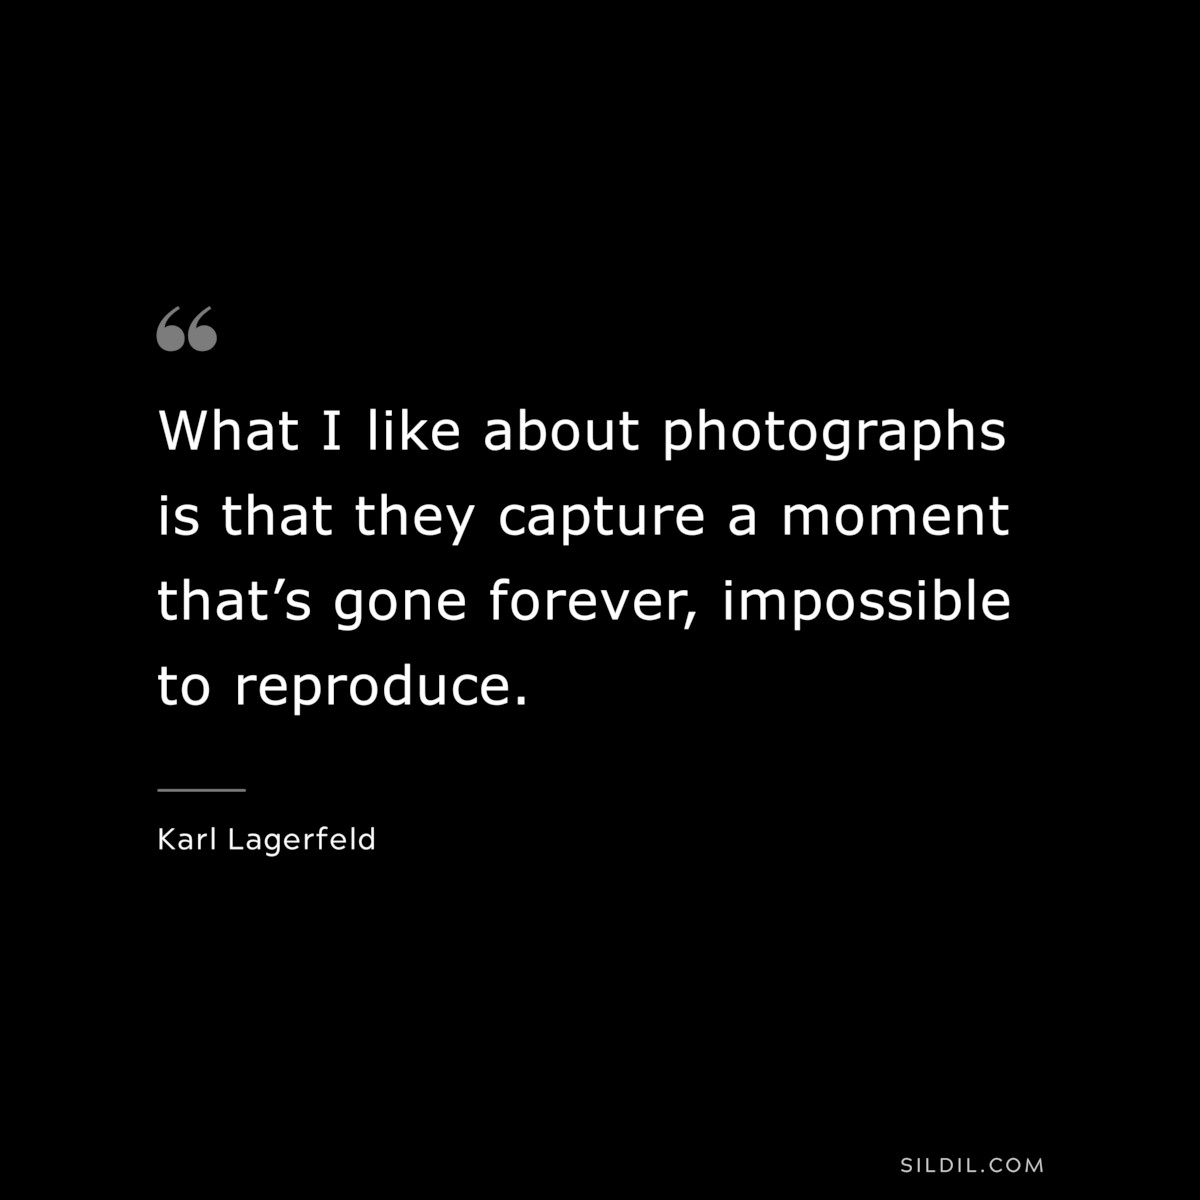 What I like about photographs is that they capture a moment that’s gone forever, impossible to reproduce. ― Karl Lagerfeld